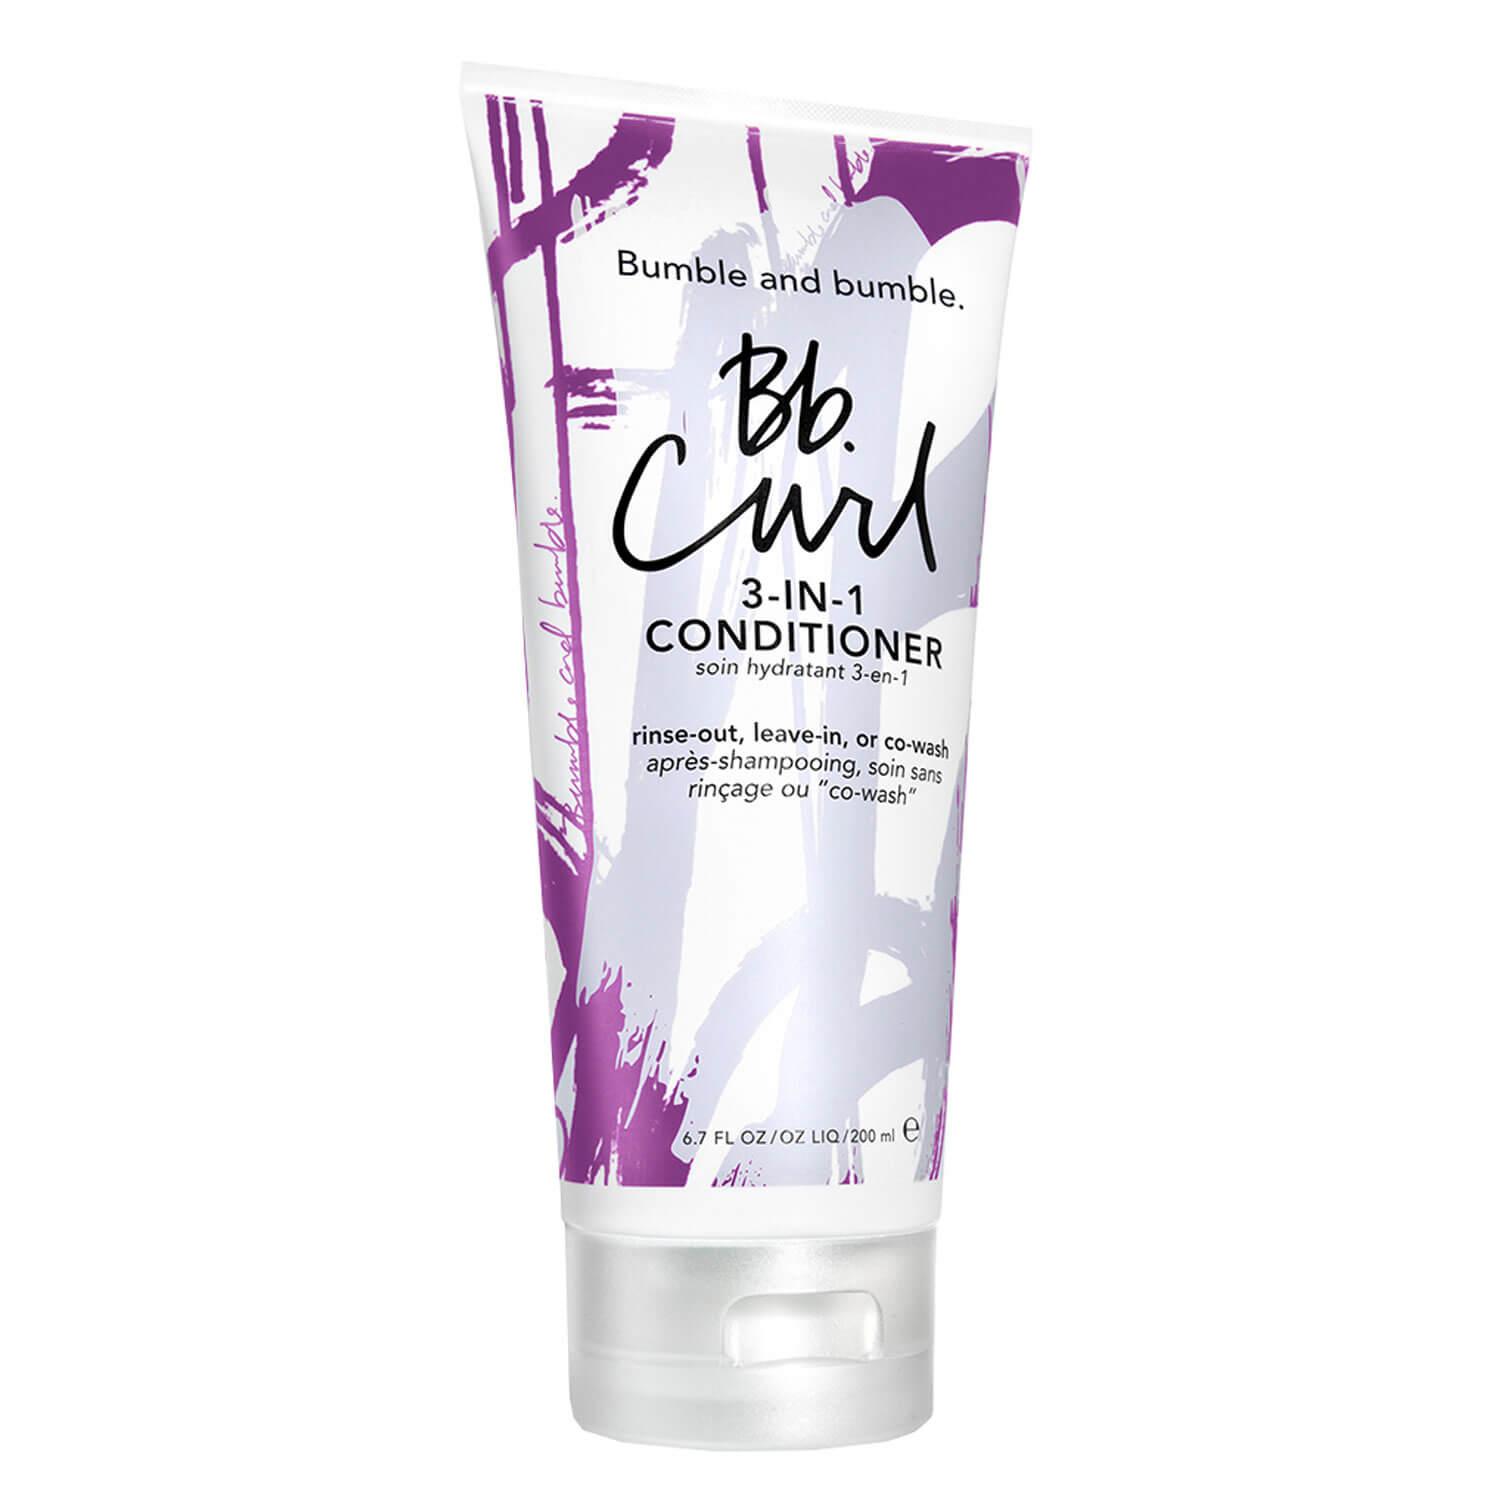 Bb. Curl - 3-in-1 Conditioner